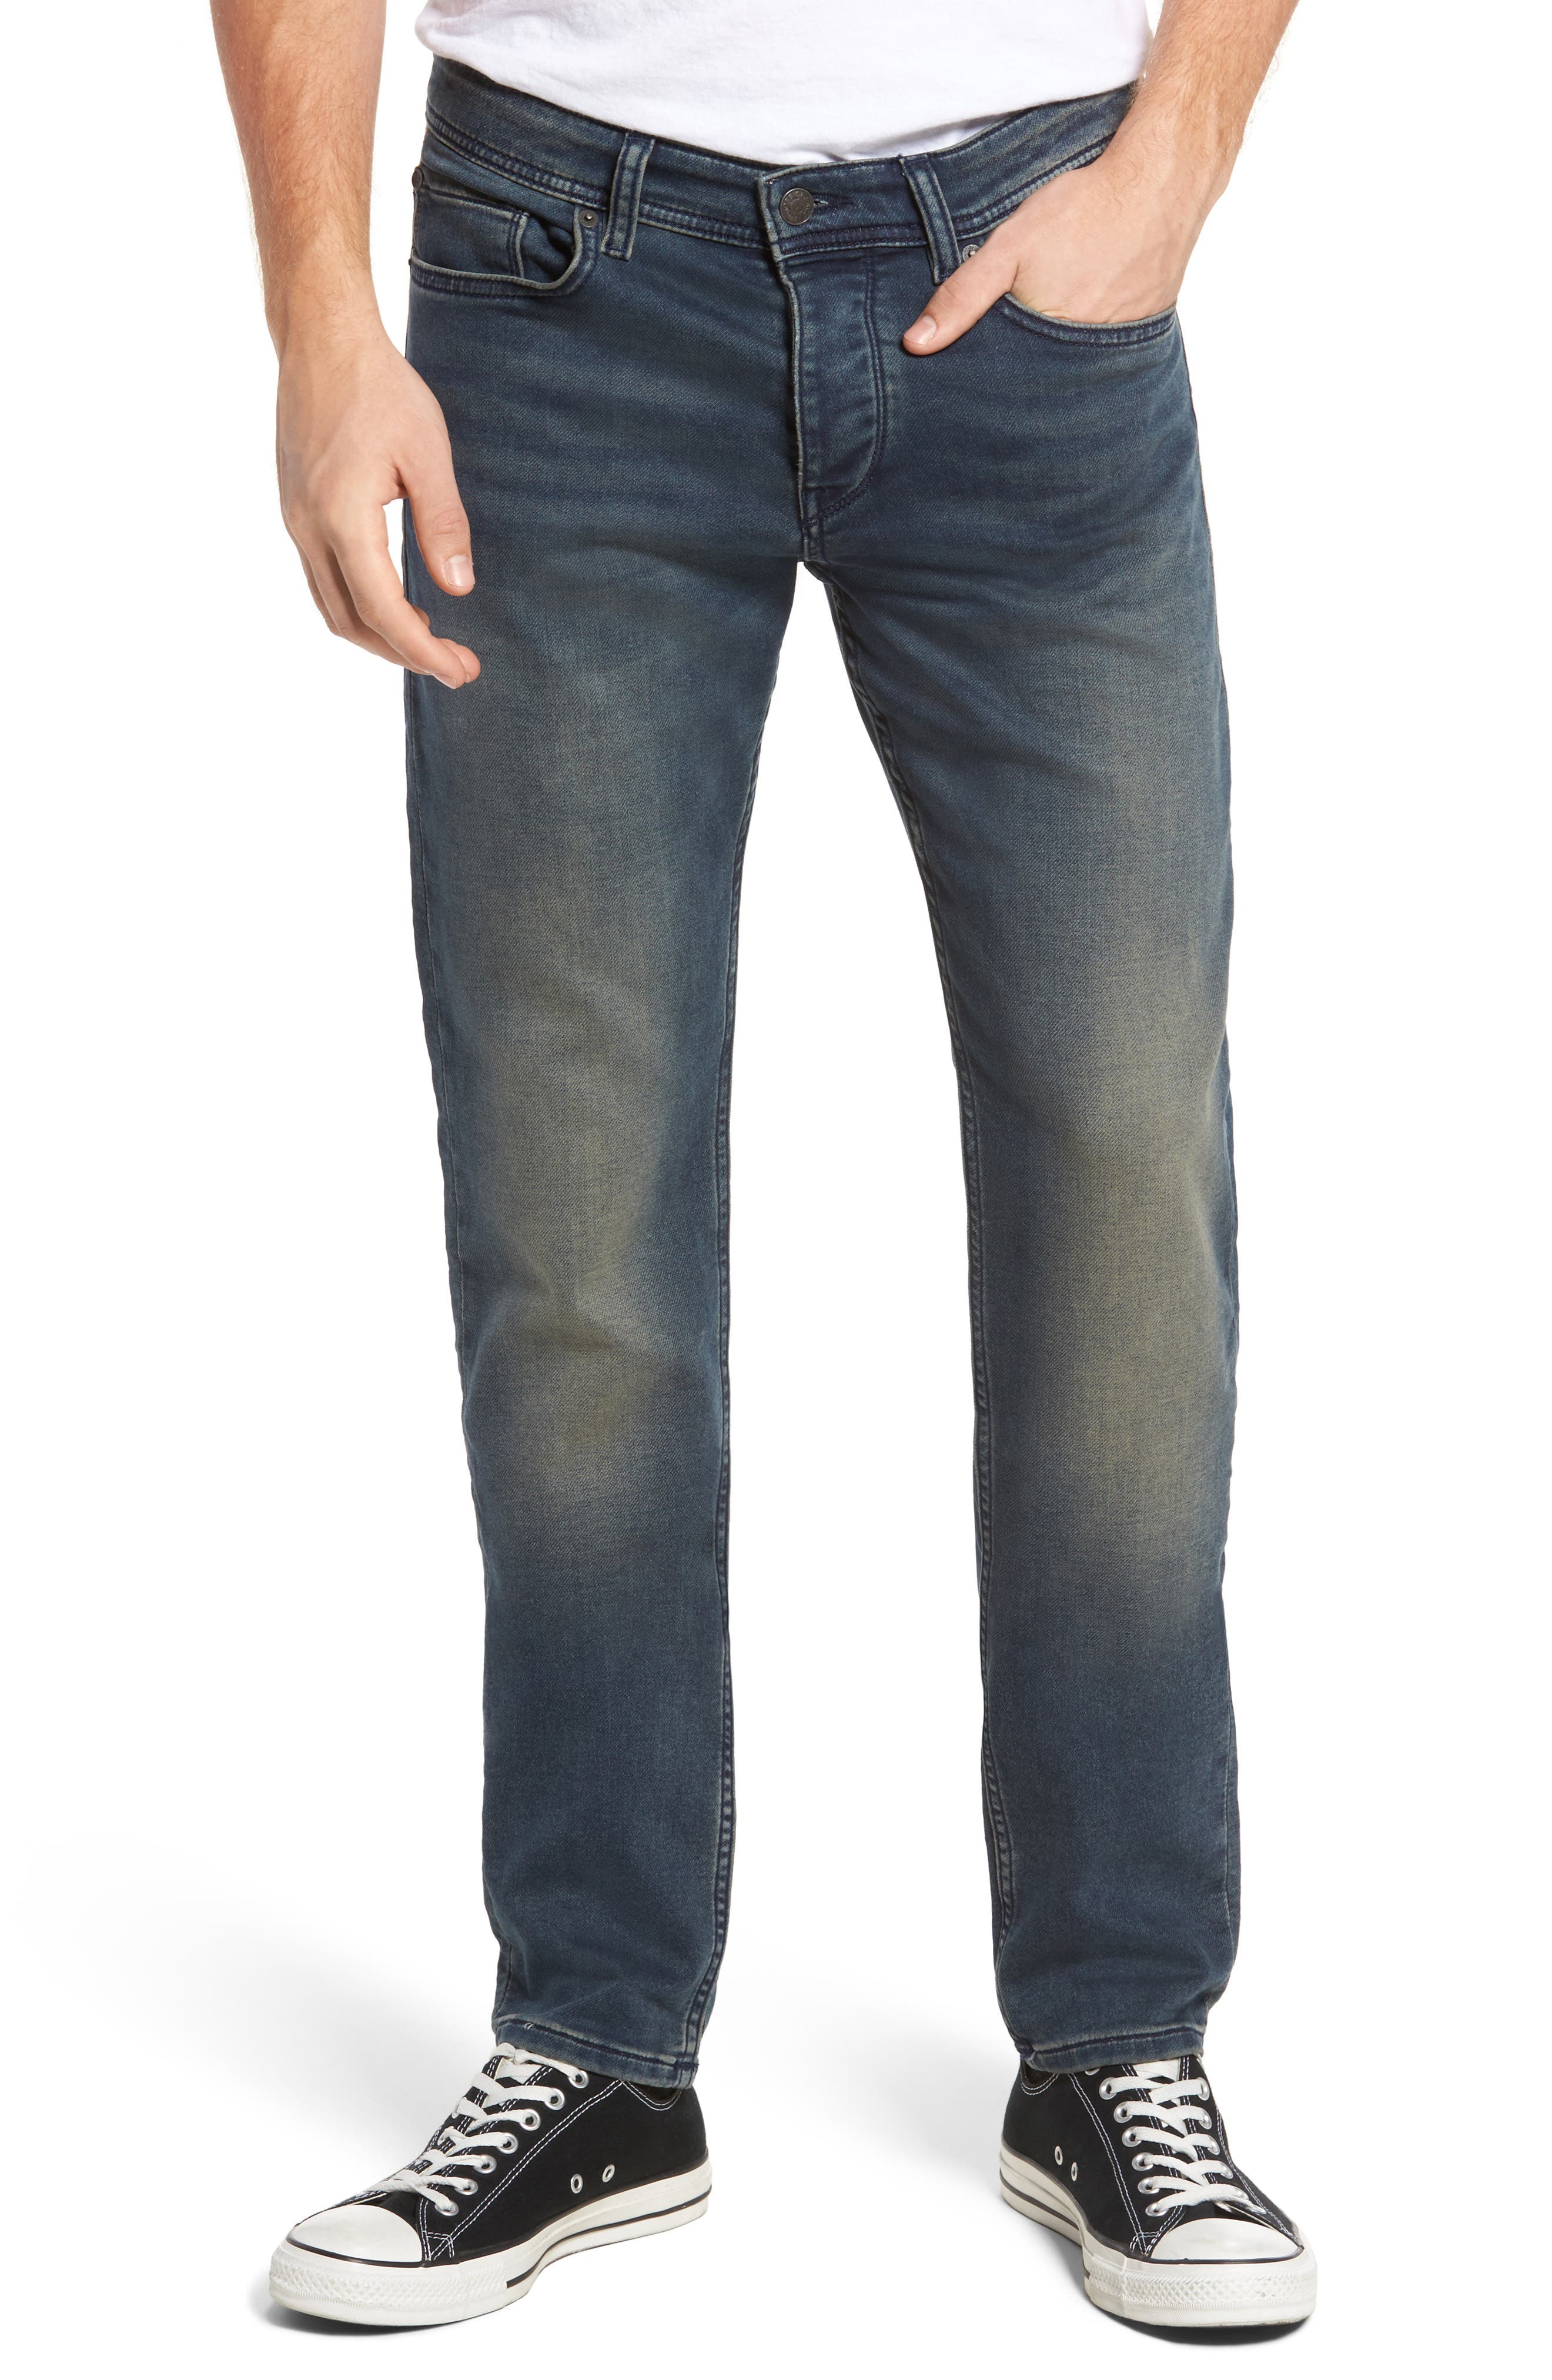 boss orange 90 tapered fit jeans